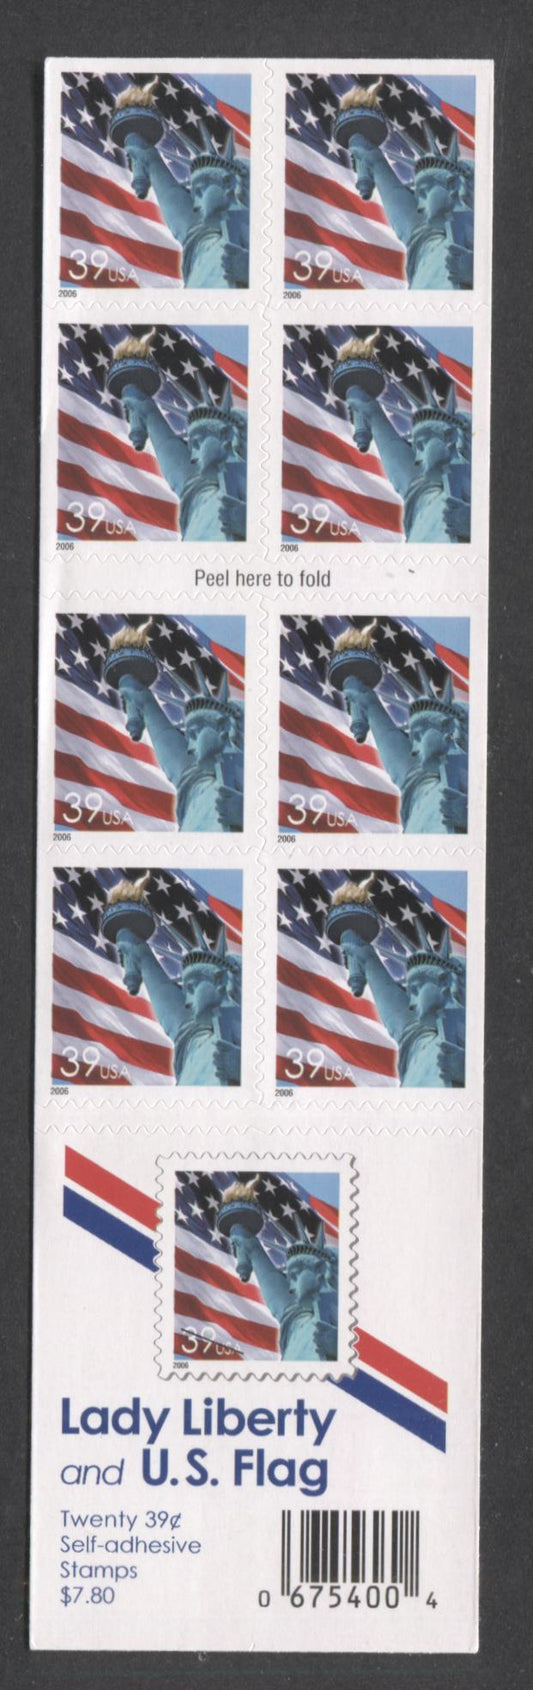 Lot 218 United States SC#3978b 39c Multicolored 2006 Flag/Statue Of Liberty Issue, Double-Sided Booklet, A VFNH Booklet Of 20, Click on Listing to See ALL Pictures, 2017 Scott Cat. $17